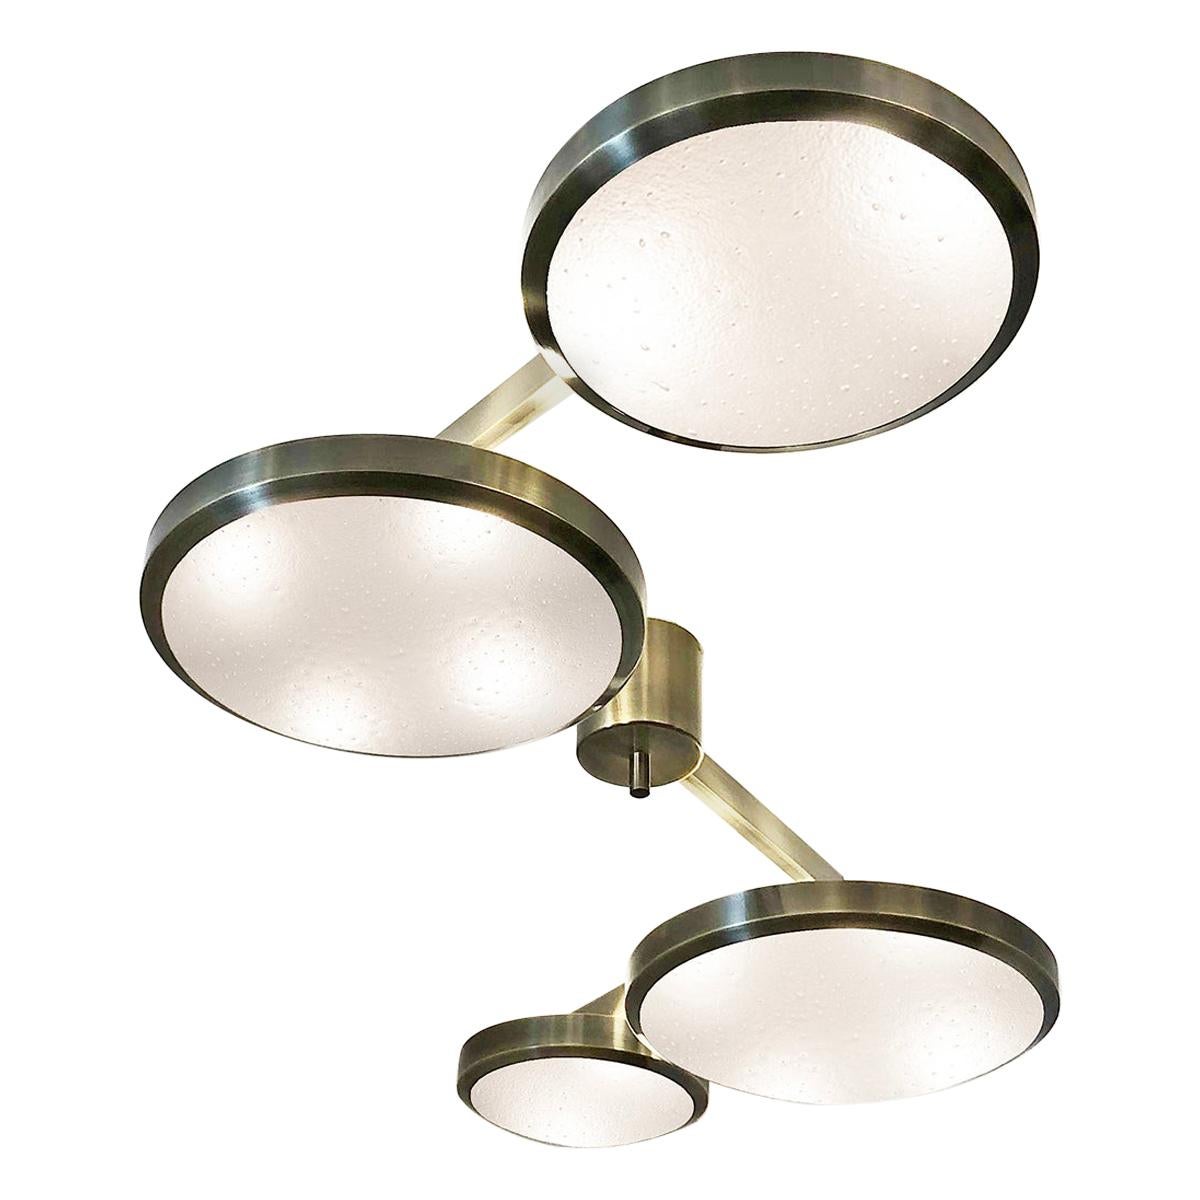 Contemporary Quattro Ceiling Light by Gaspare Asaro - Polished Brass Finish For Sale